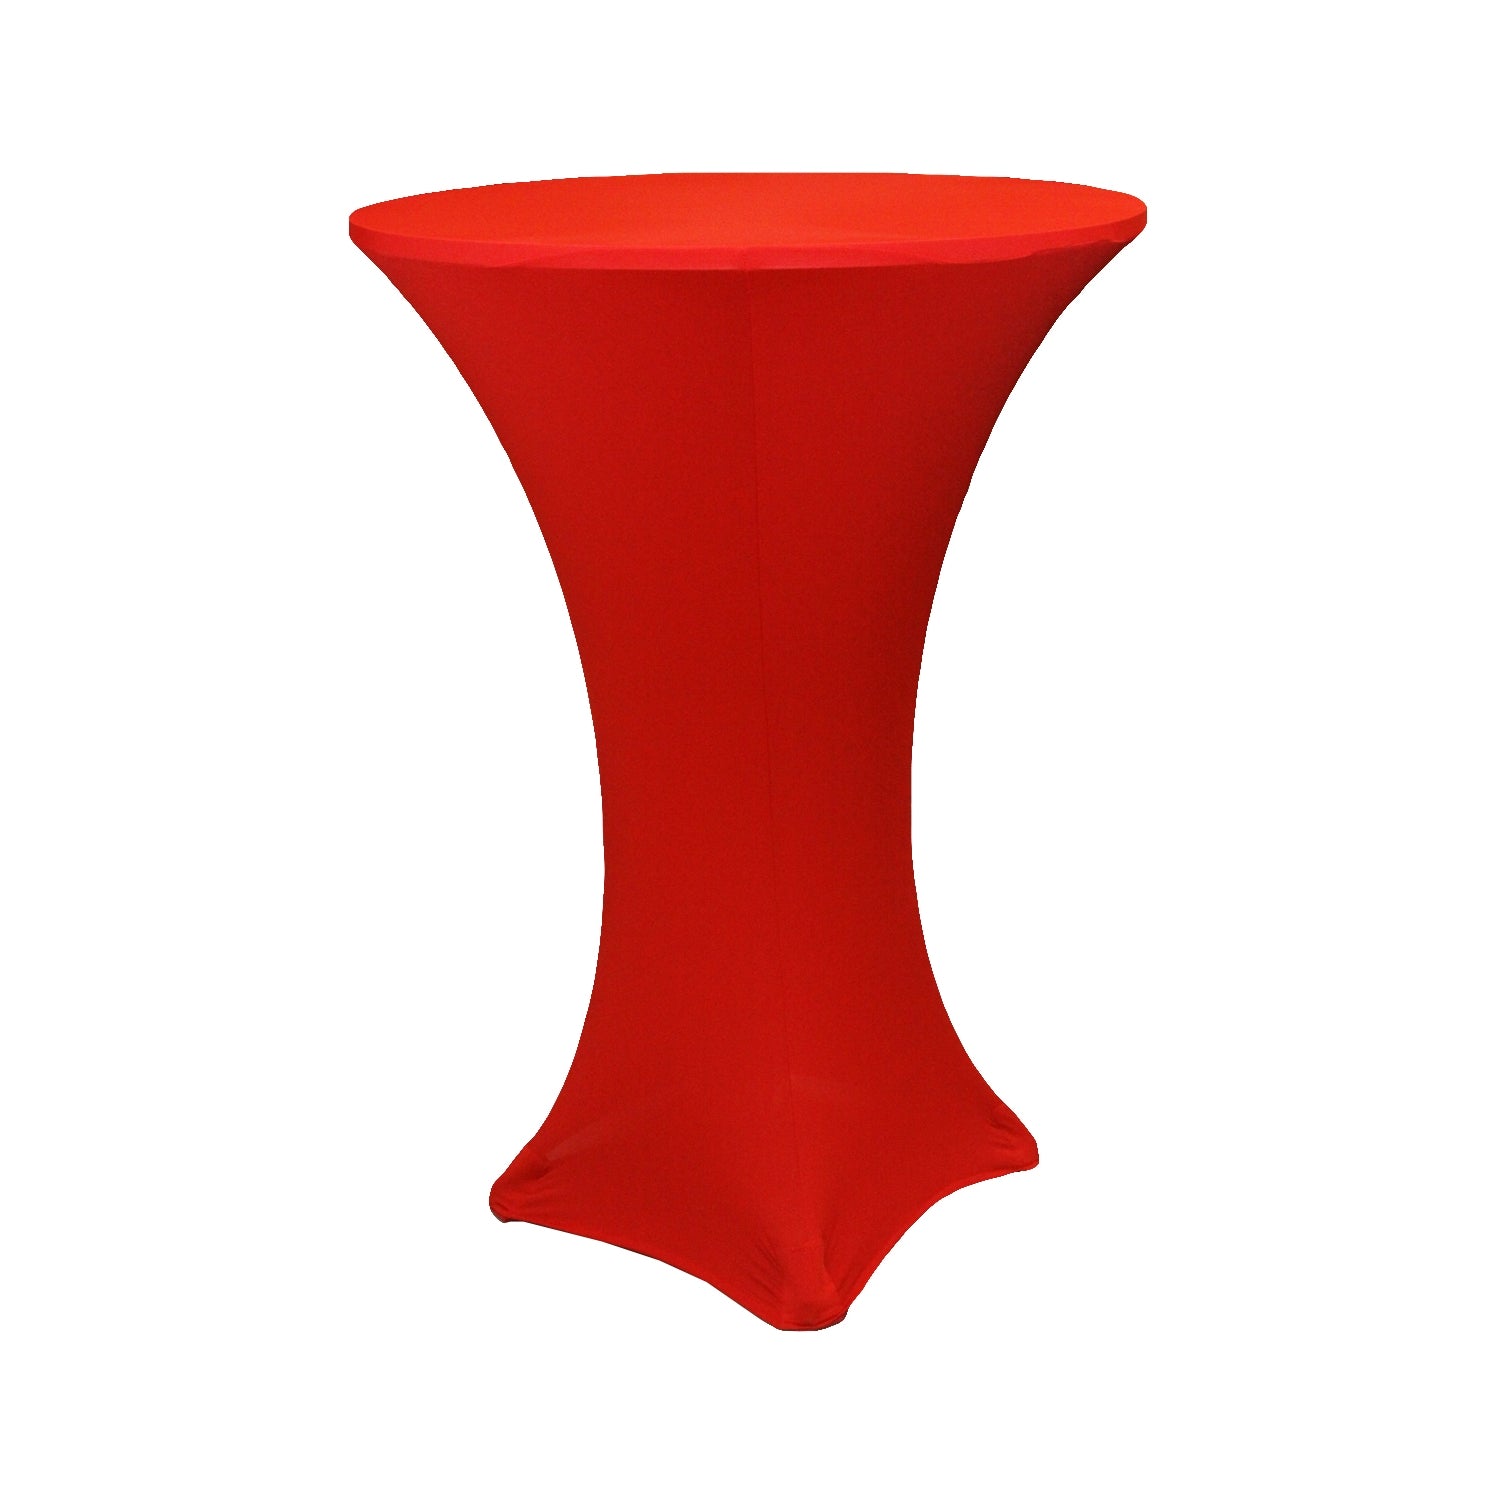 Spandex Cocktail Table Cover 30" Round - Red - CV Linens